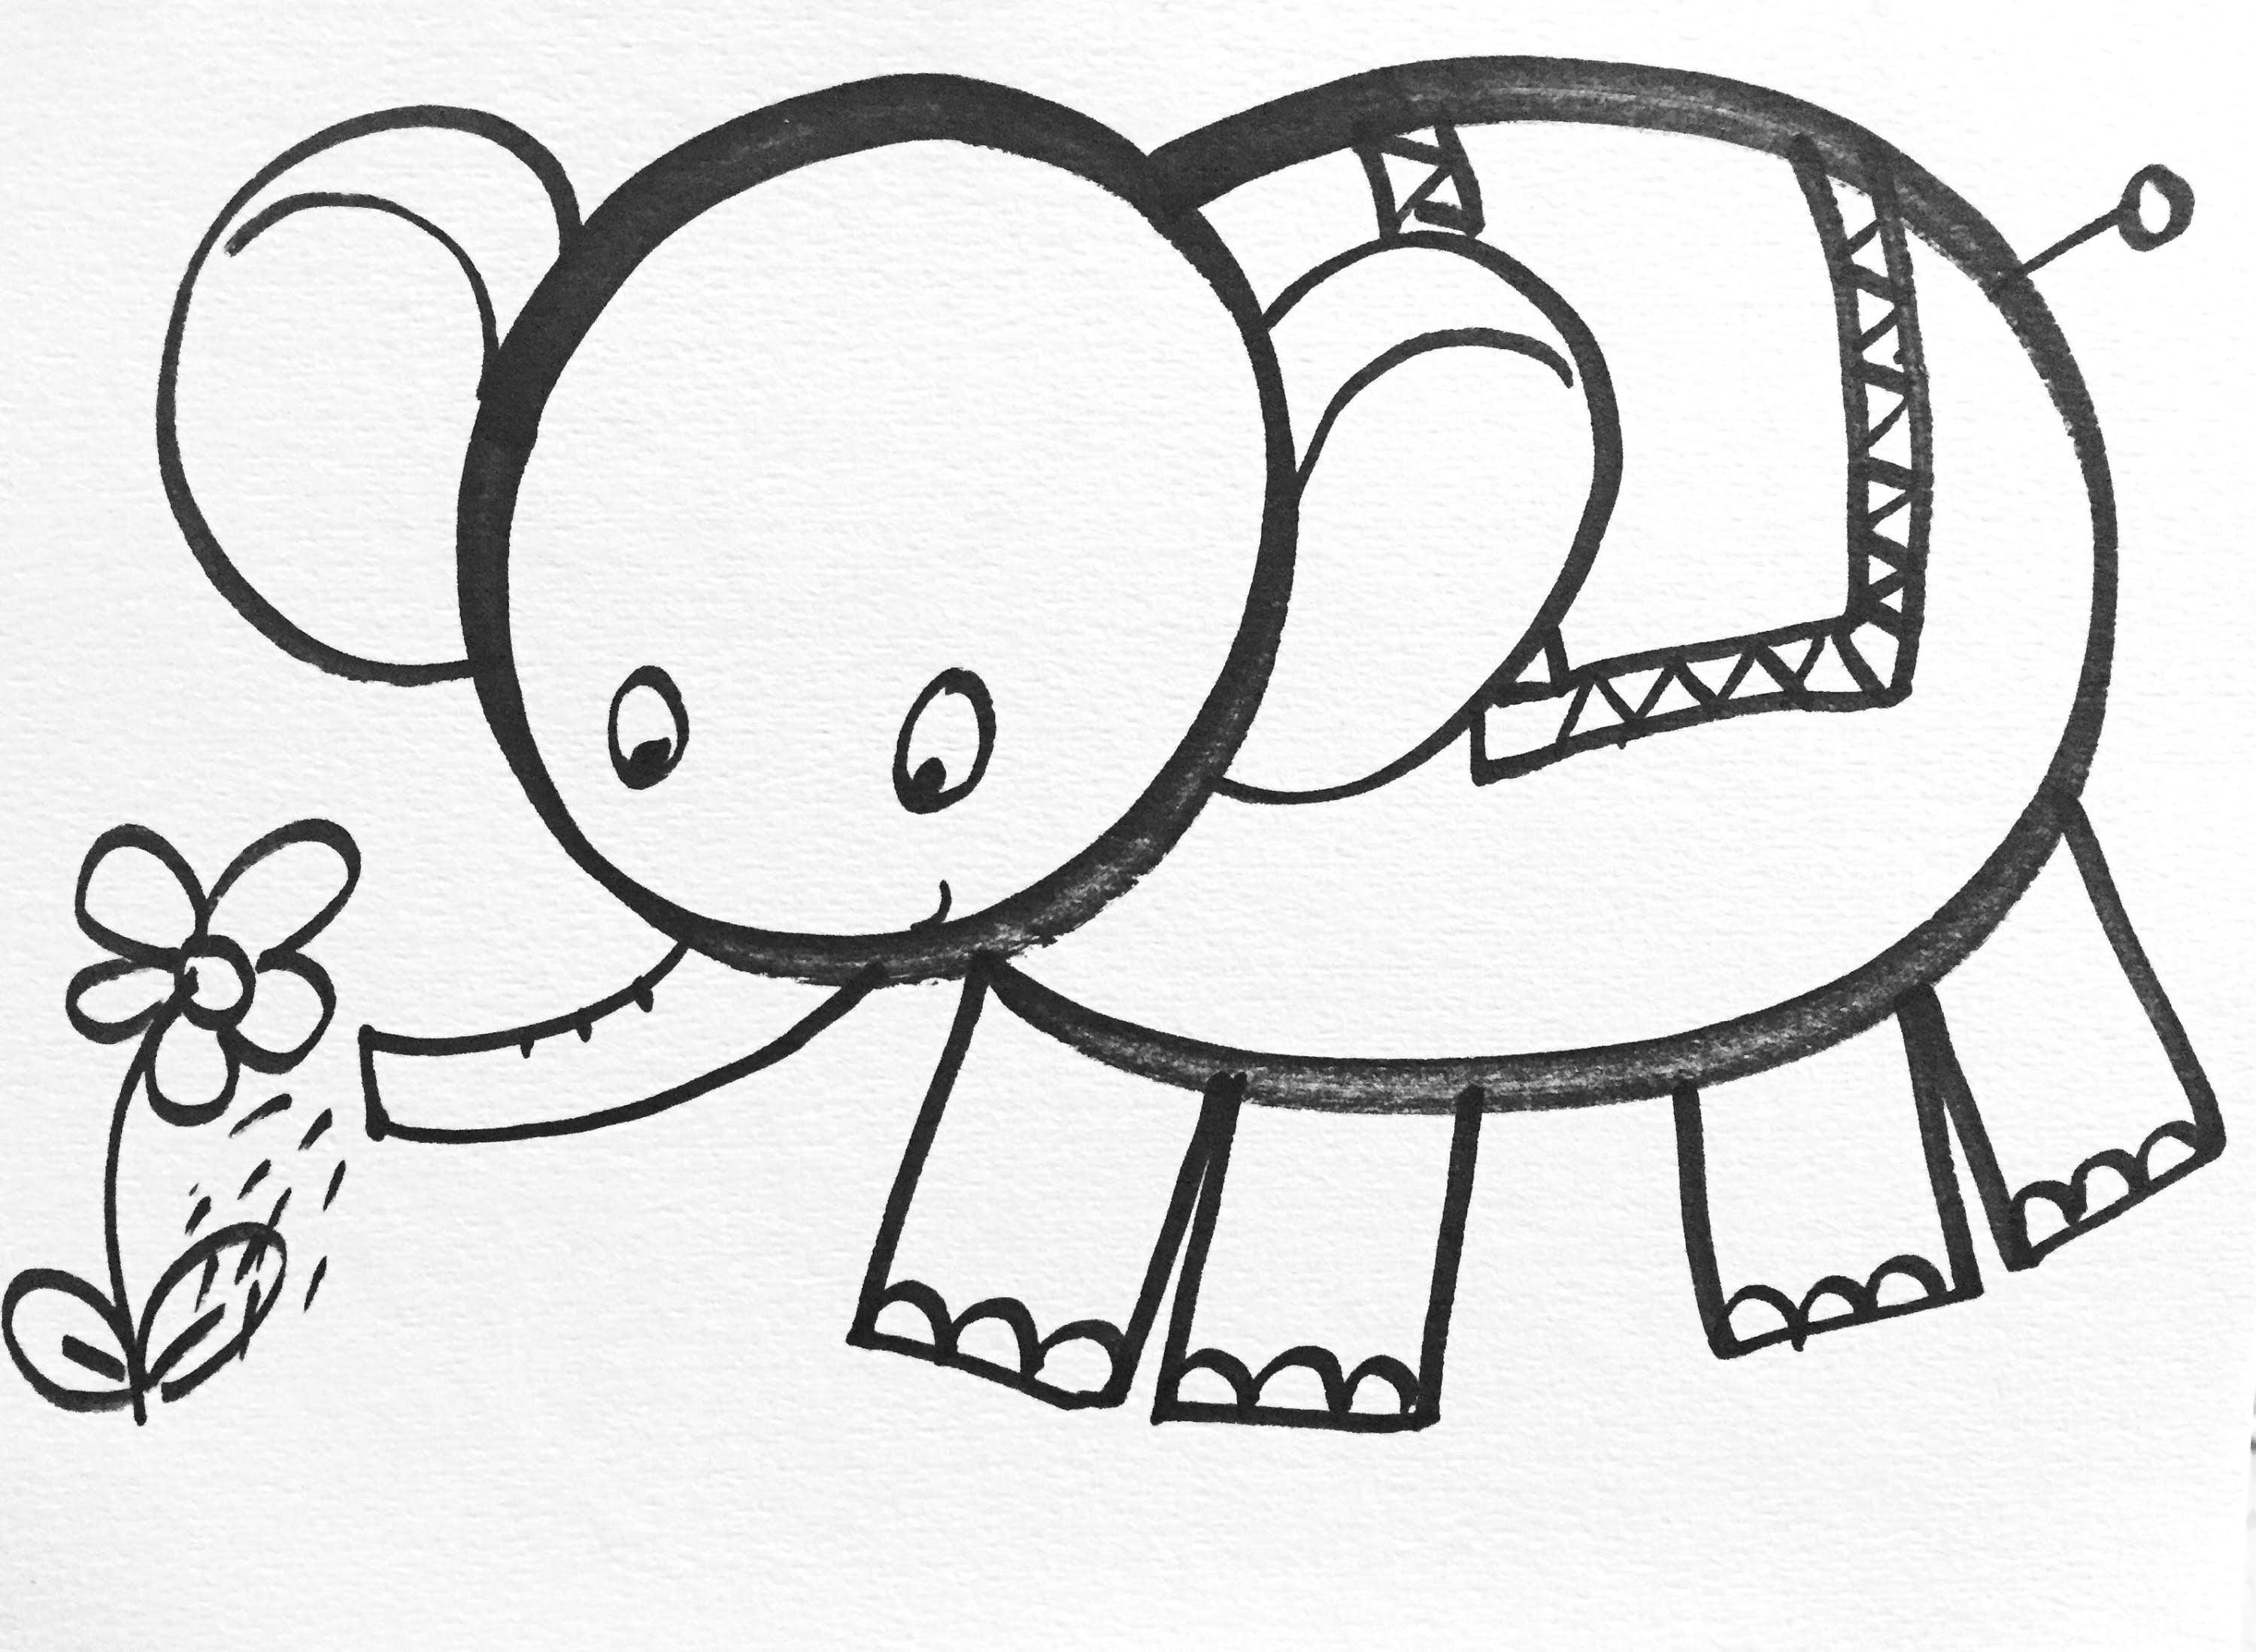 learn how to draw easy in this drawing you can learn to draw the adorable elephant as a cute cartoon character step by step from the popular youtube art